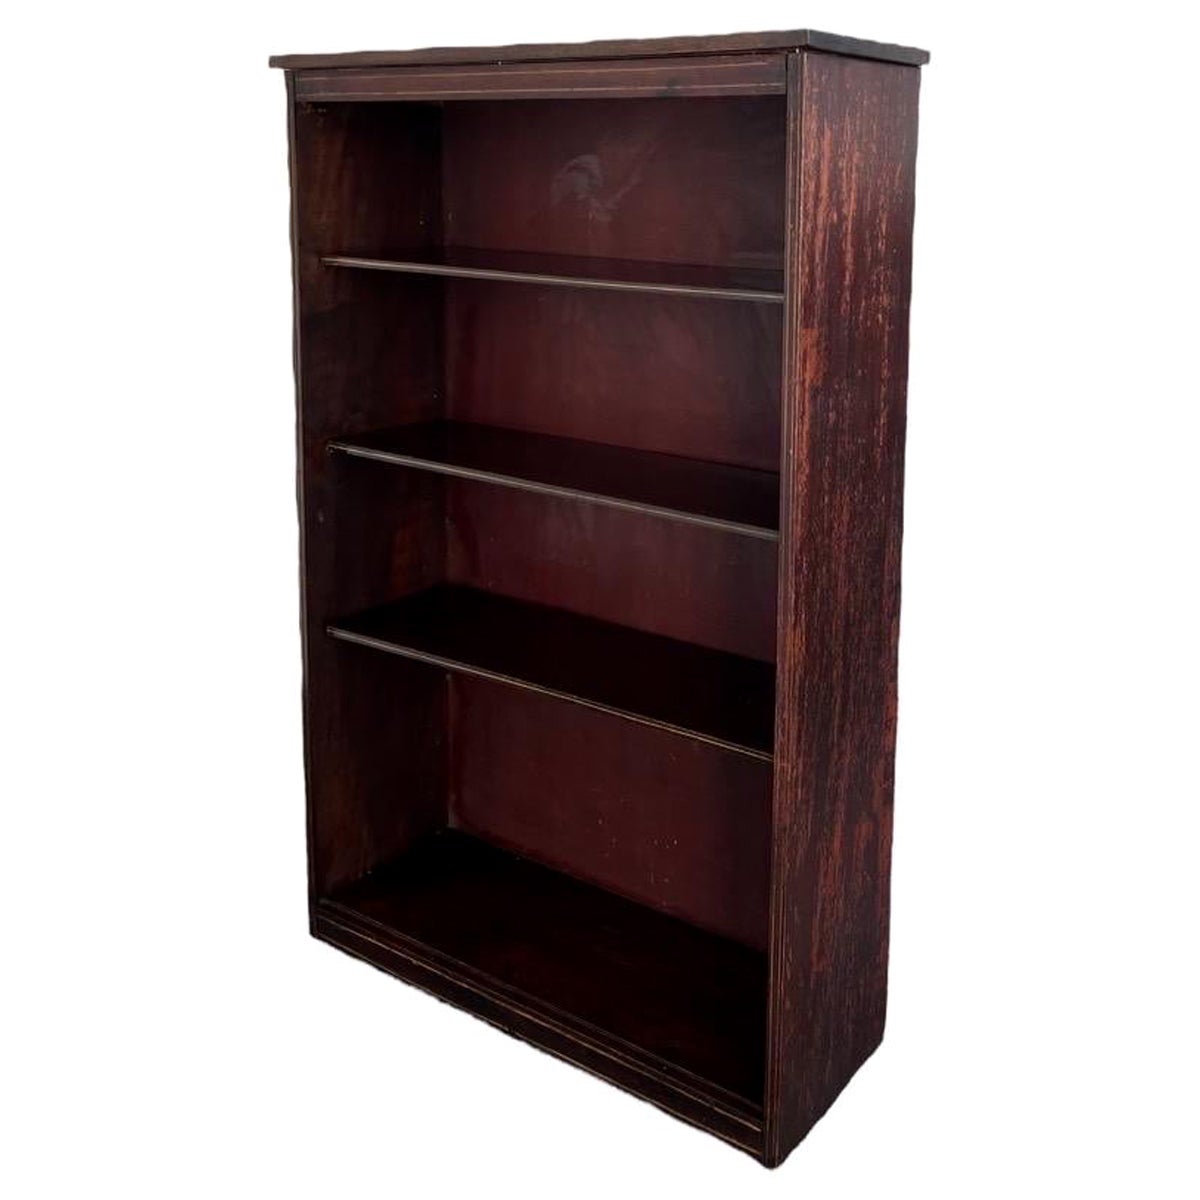 Vintage Early American Bookshelf with Mahogany Finish For Sale